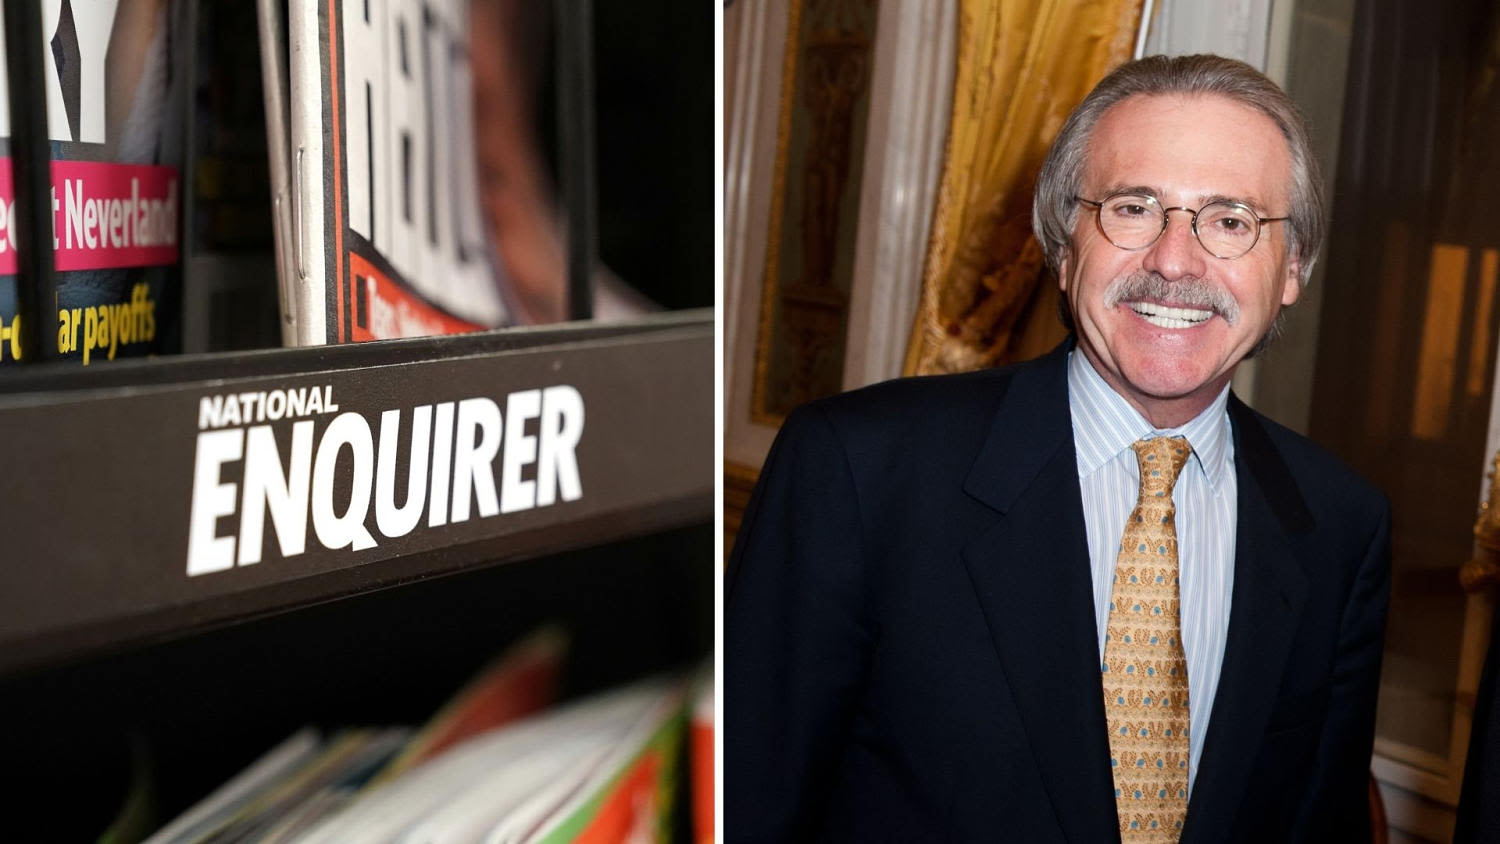 How the National Enquirer became a ‘megaphone’ for Donald Trump’s 2016 campaign